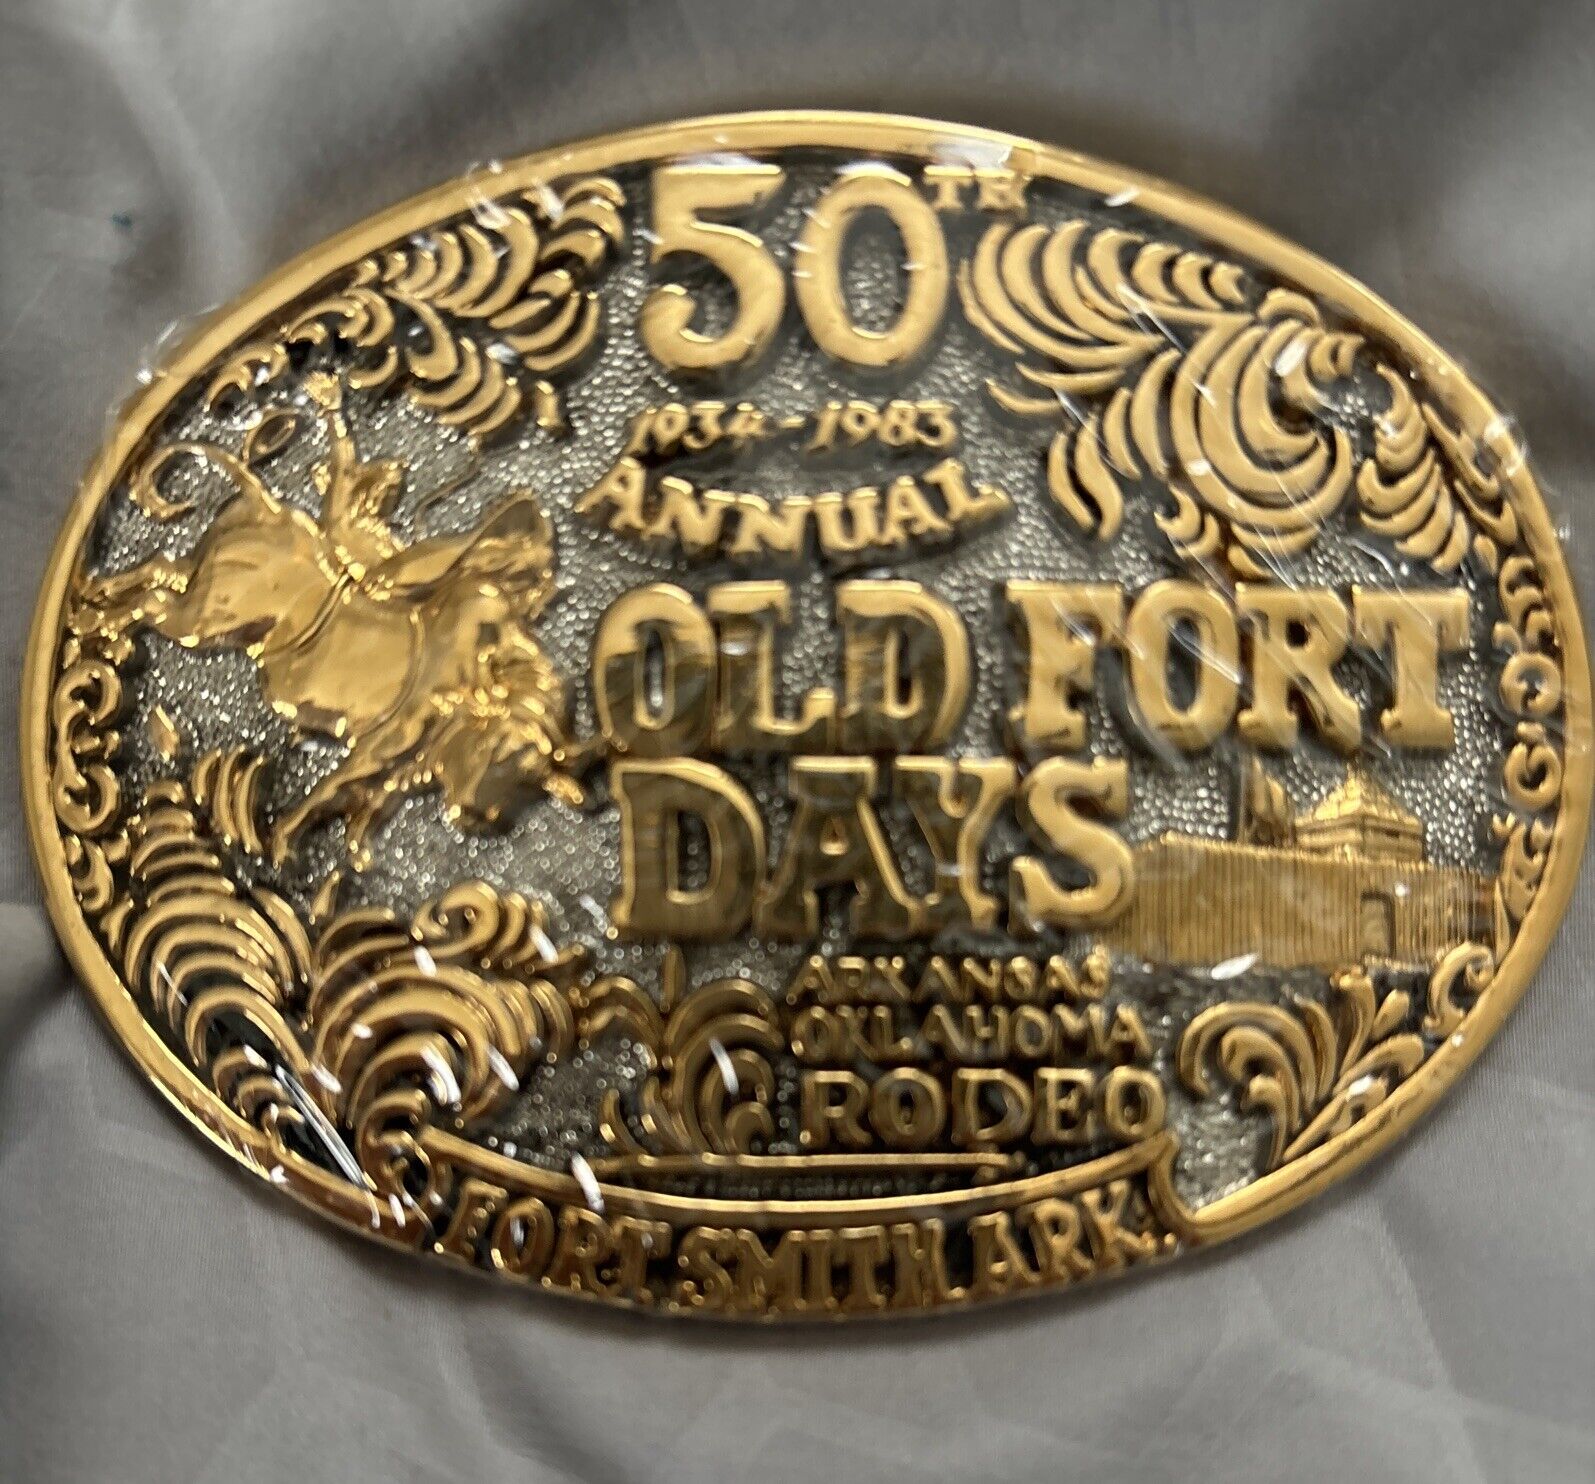 Old Fort Days 50 Th Annual Arkansas Rodeo Fort Smith Ark 1934-1983 RARE